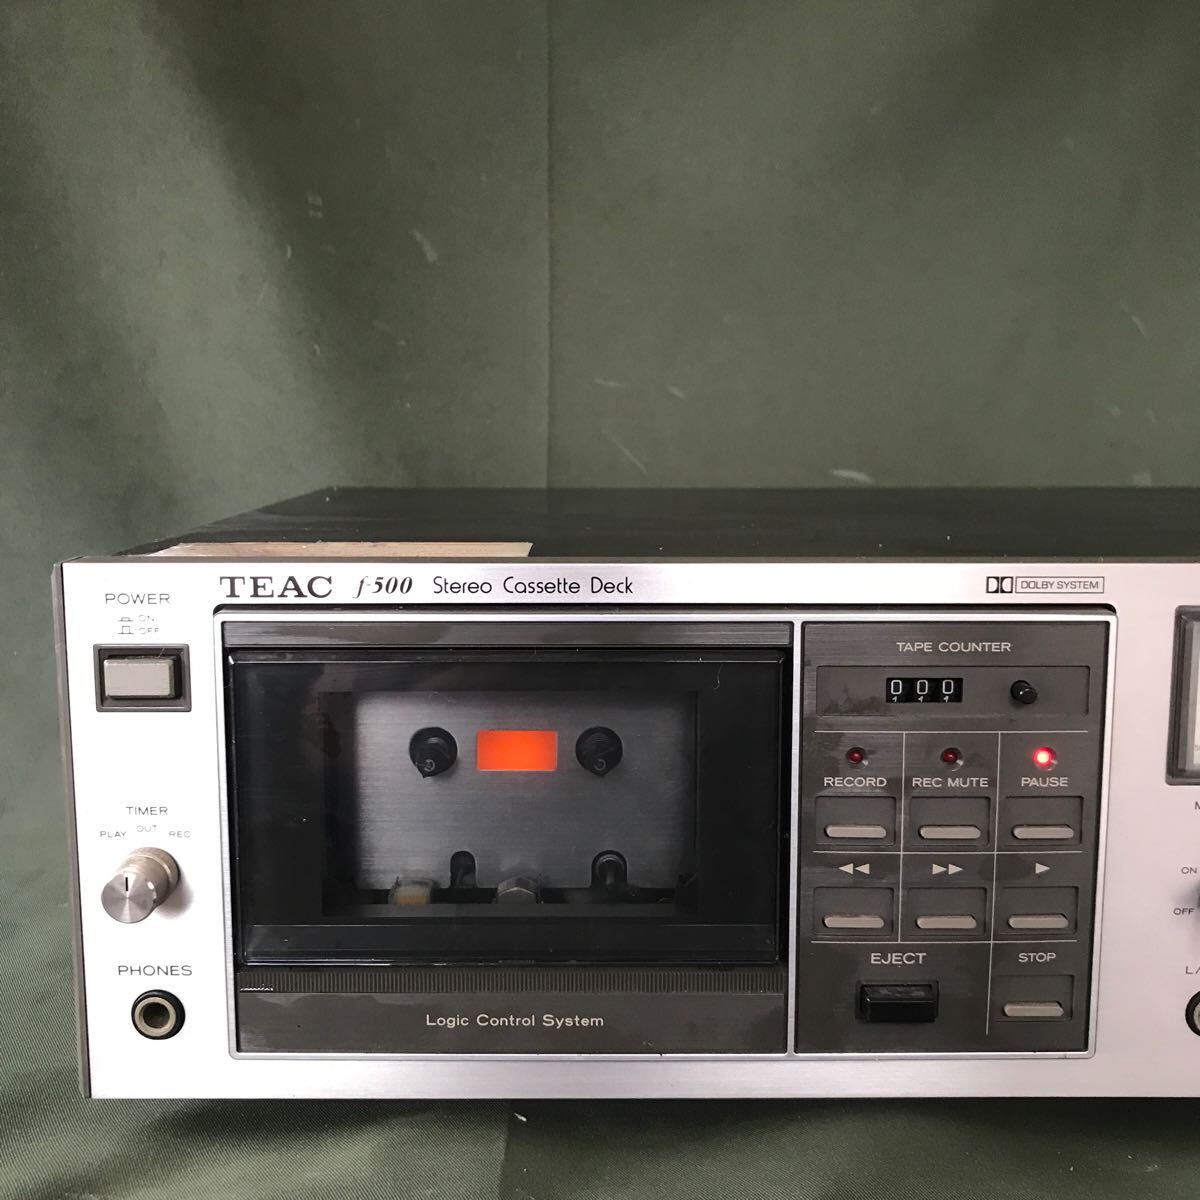 TEAC ティアック　ステレオカセットデッキ　F-500 STEREO CASSETTE DECK 本体　通電確認済み　ジャンク品_画像3